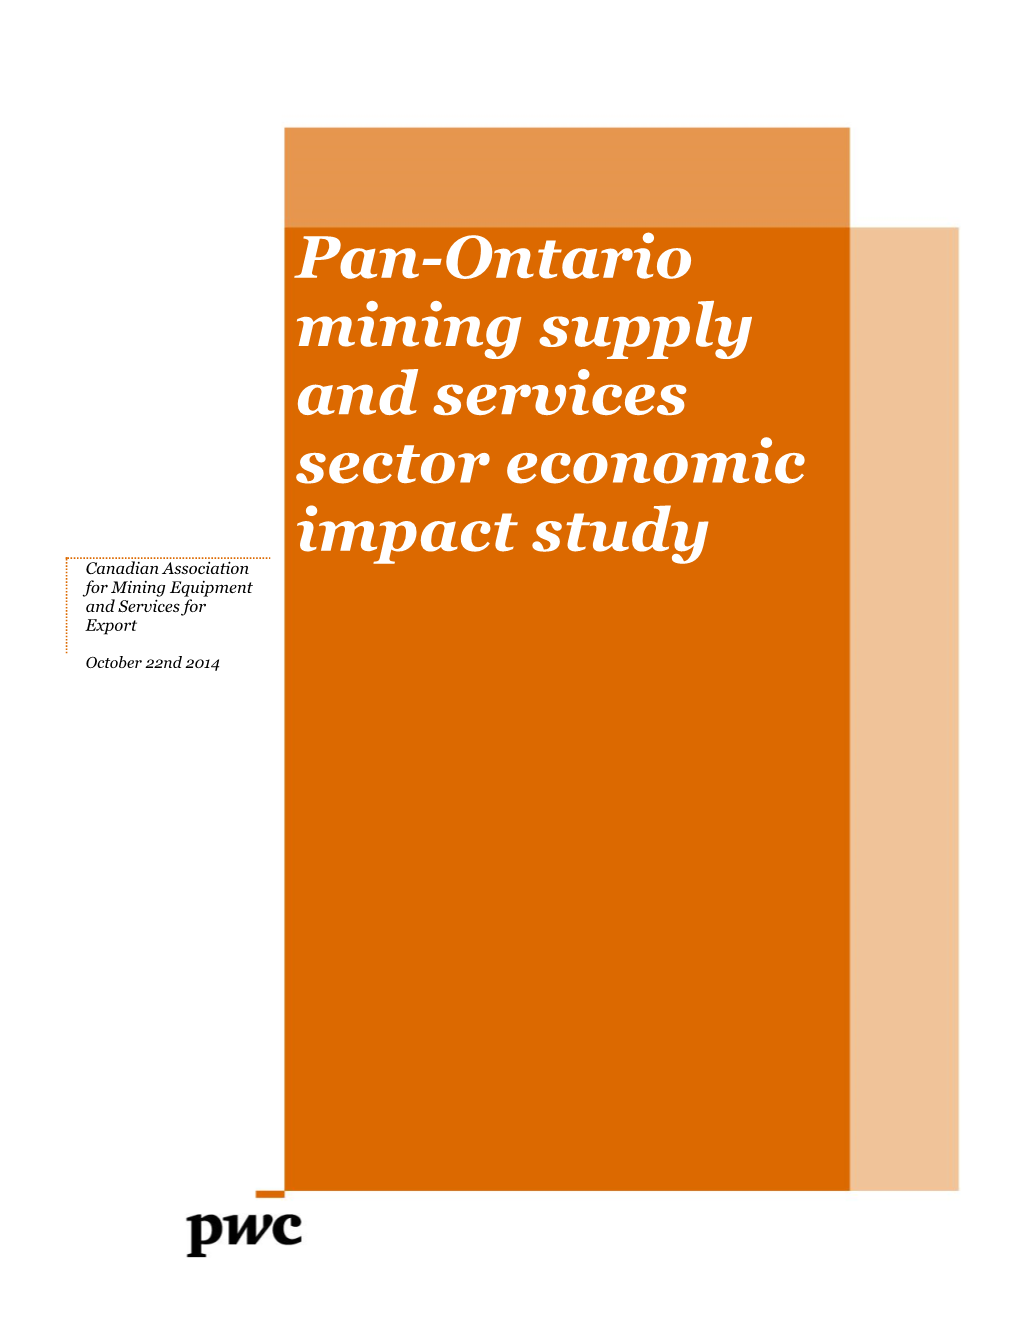 Pan-Ontario Mining Supply and Services Sector Economic Impact Study Canadian Association for Mining Equipment and Services for Export